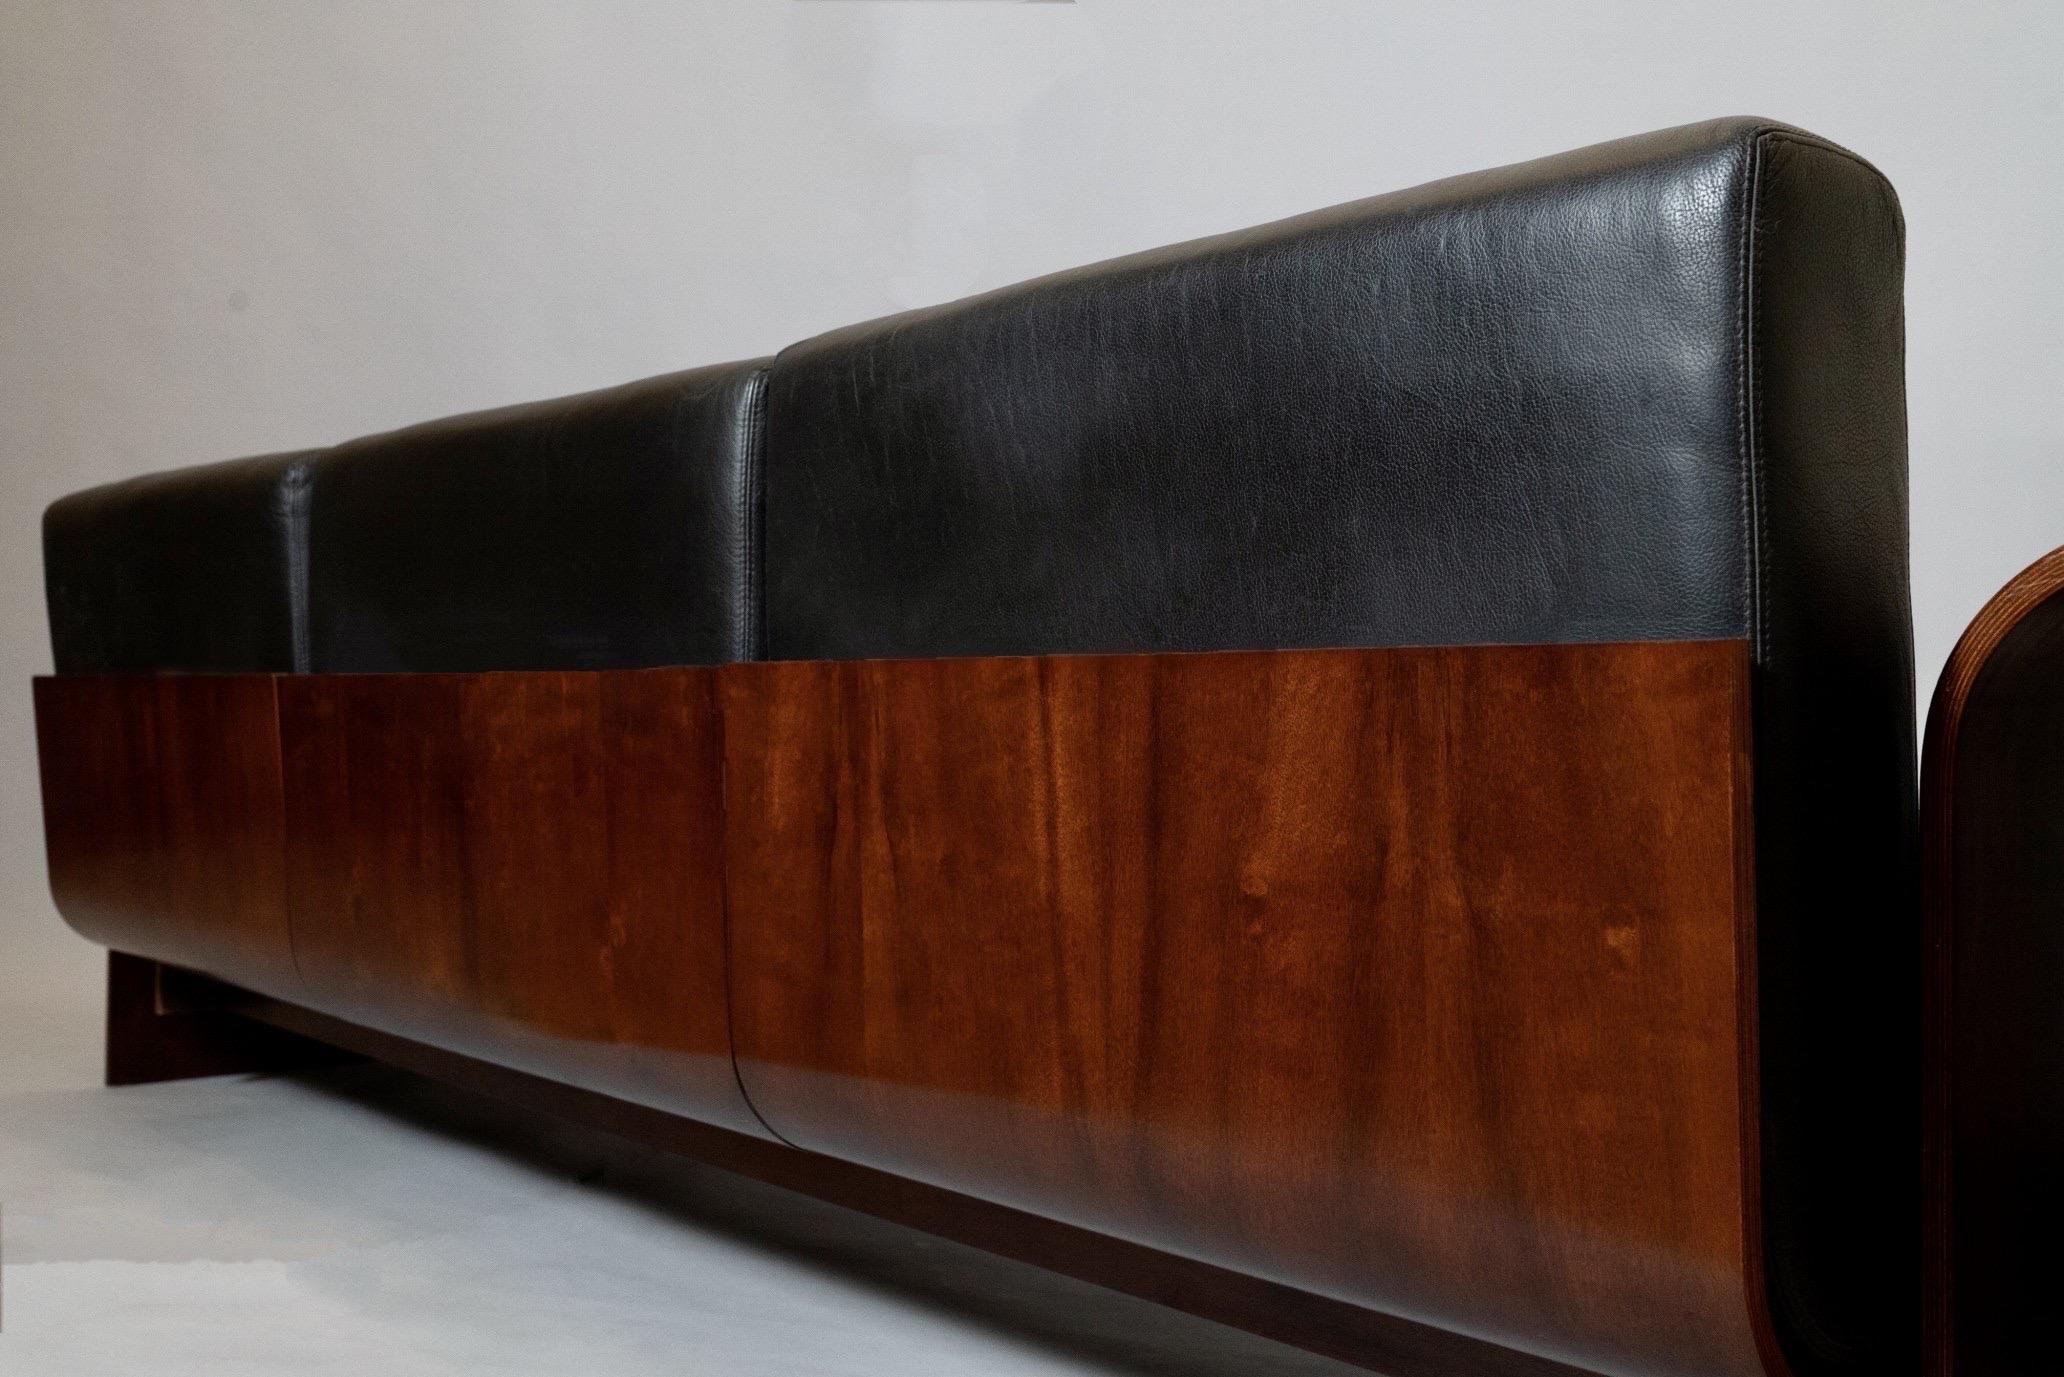 Oscar Niemeyer Exceptional Sofa in Rosewood and Leather, Hotel SESC, Brazil 1990 For Sale 4